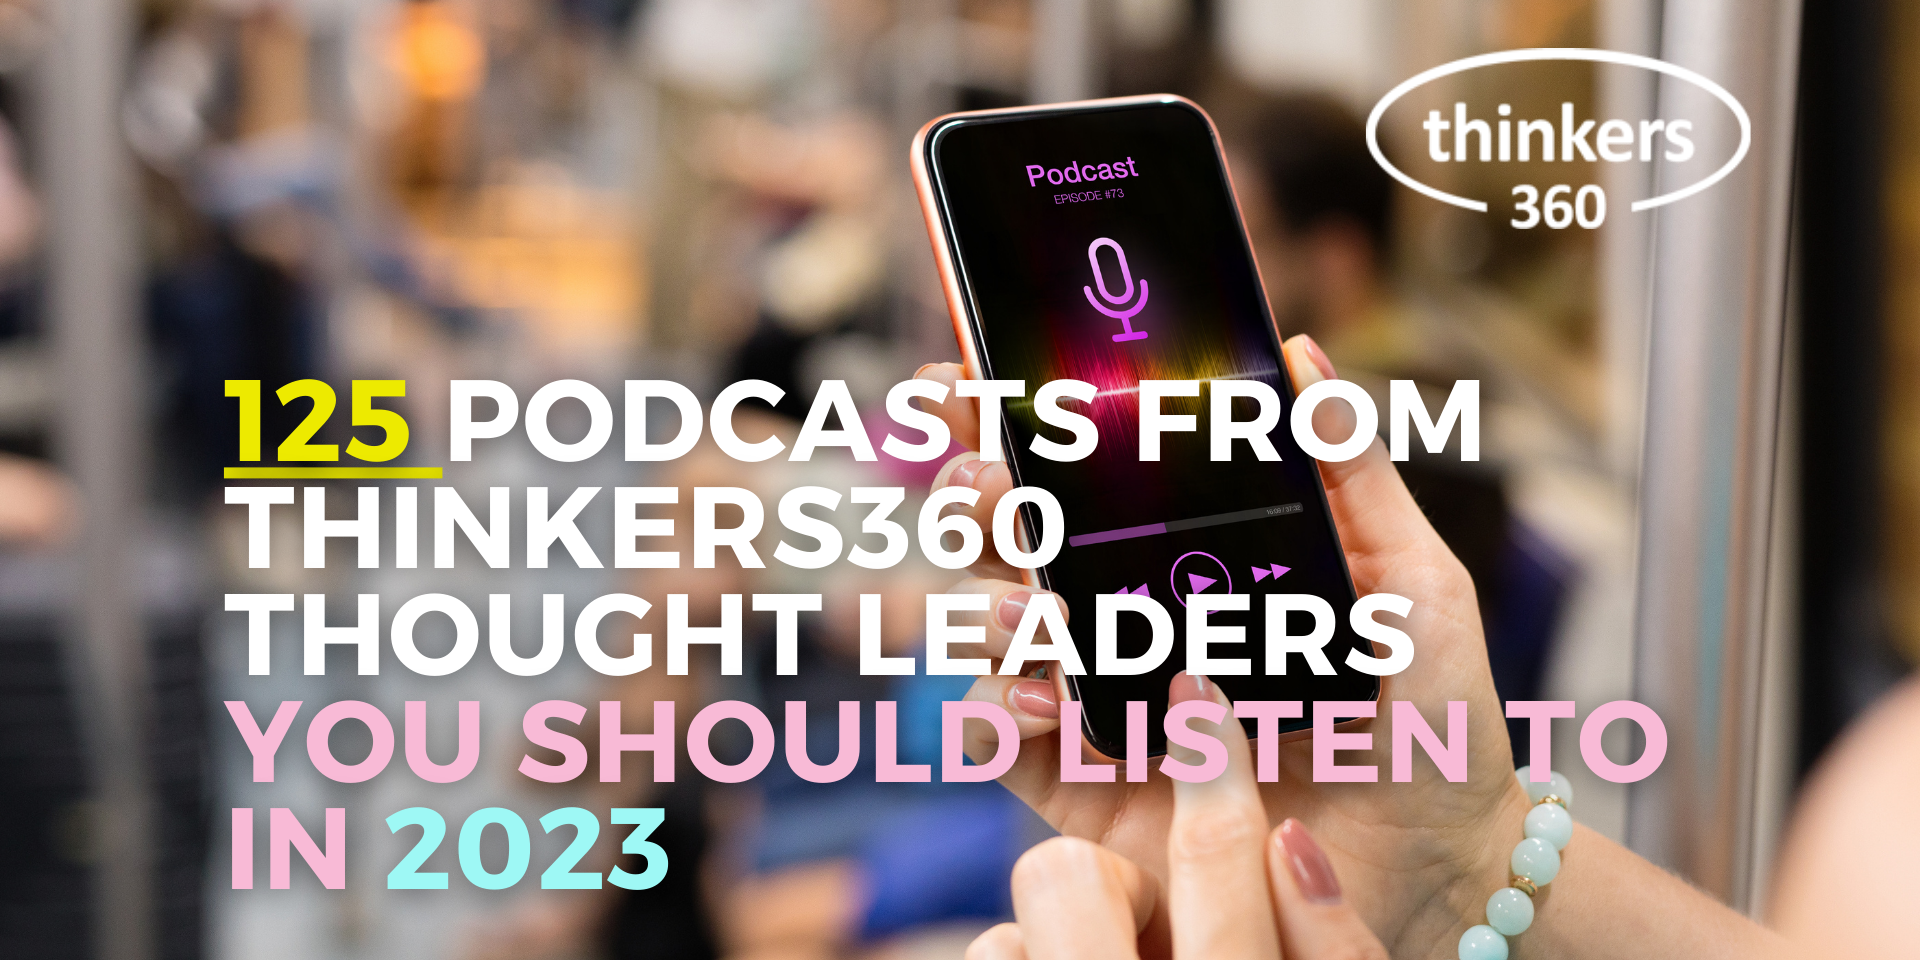 https://www.thinkers360.com/wp-content/uploads/2022/10/125-Podcasts-from-Thinkers360-Thought-Leaders-YOU-SHOULD-LISTEN-TO-IN-2023-1920x960.png